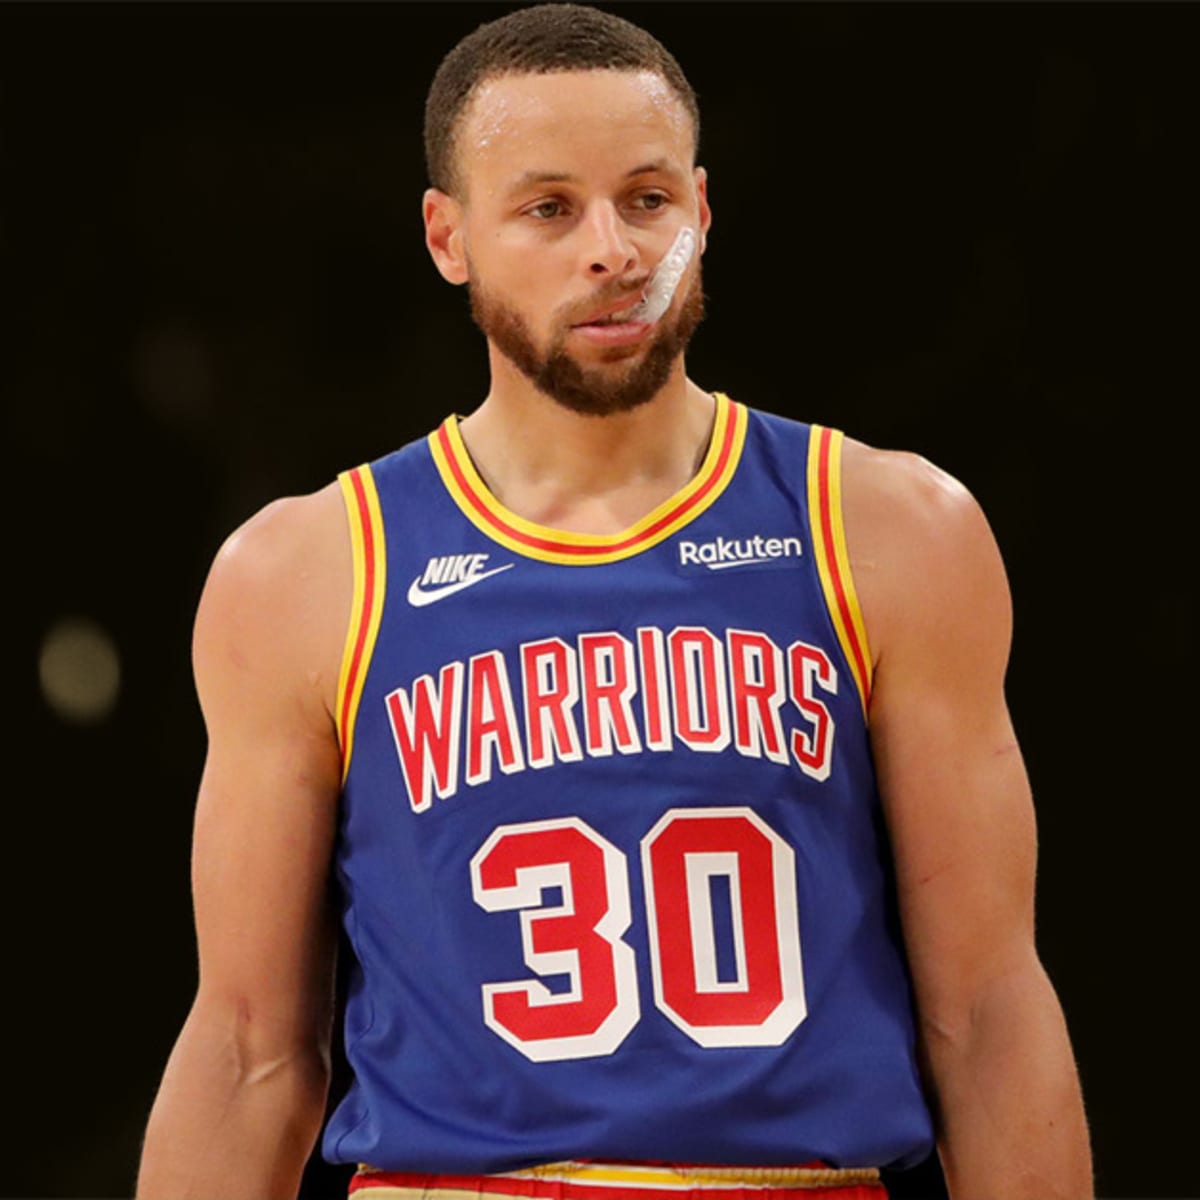 Steph Curry caught being fashionable!